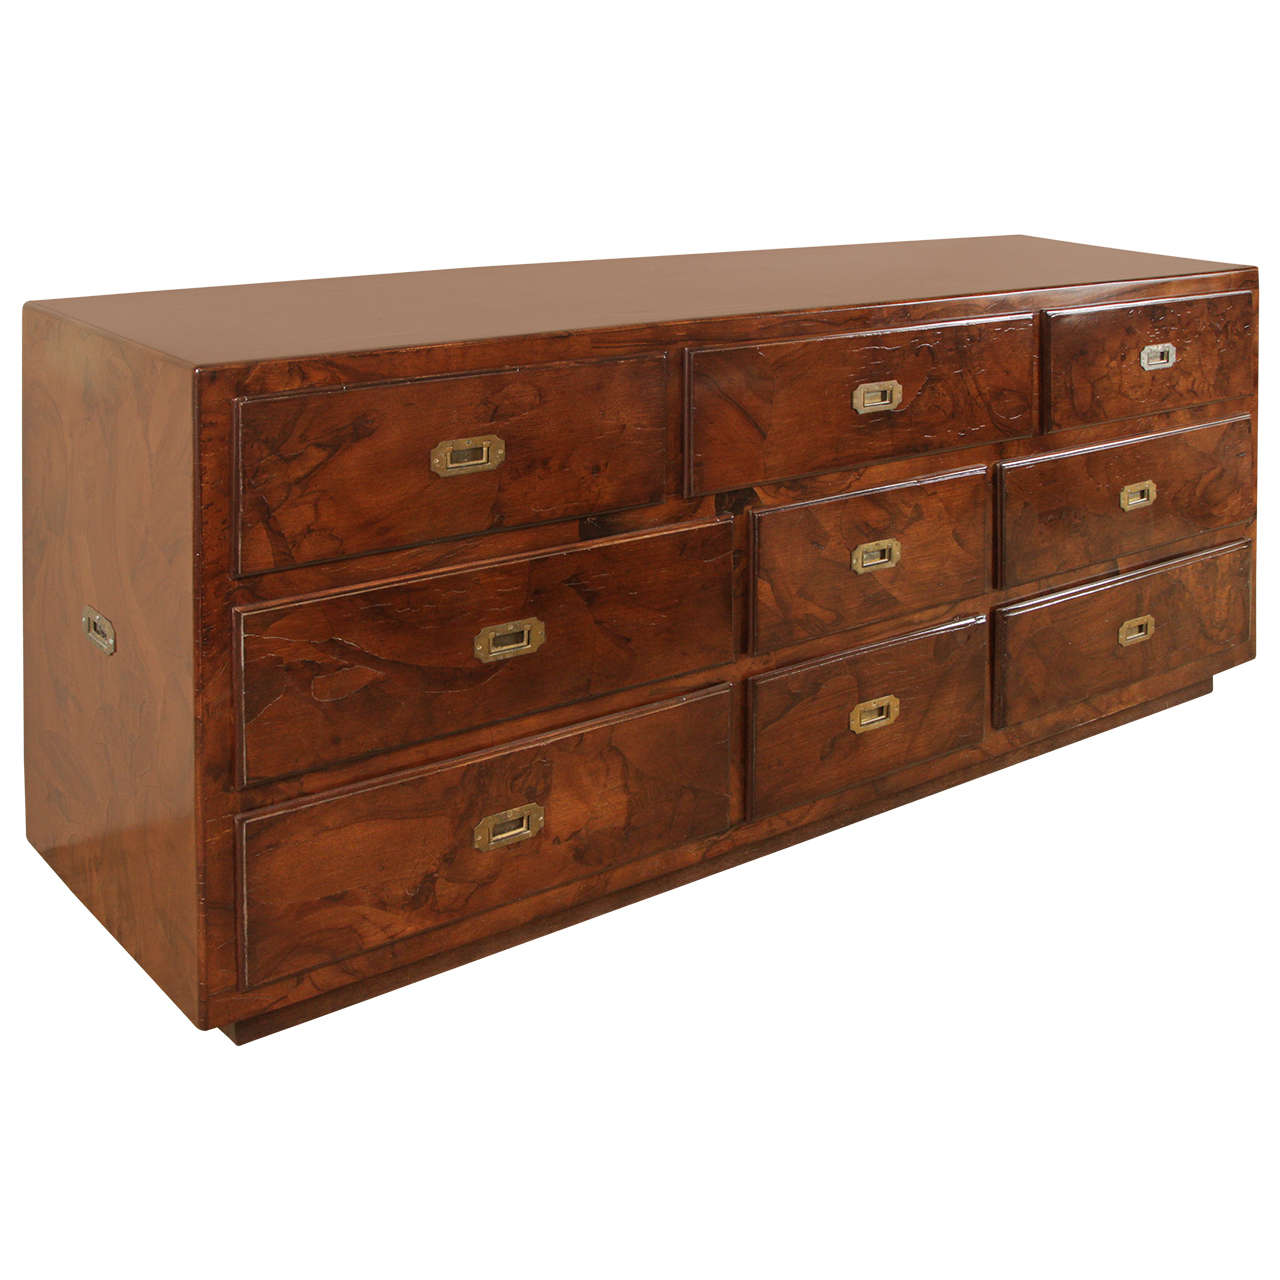 Stained Olive Burl Wood Dresser with Campaign Style Hardware For Sale